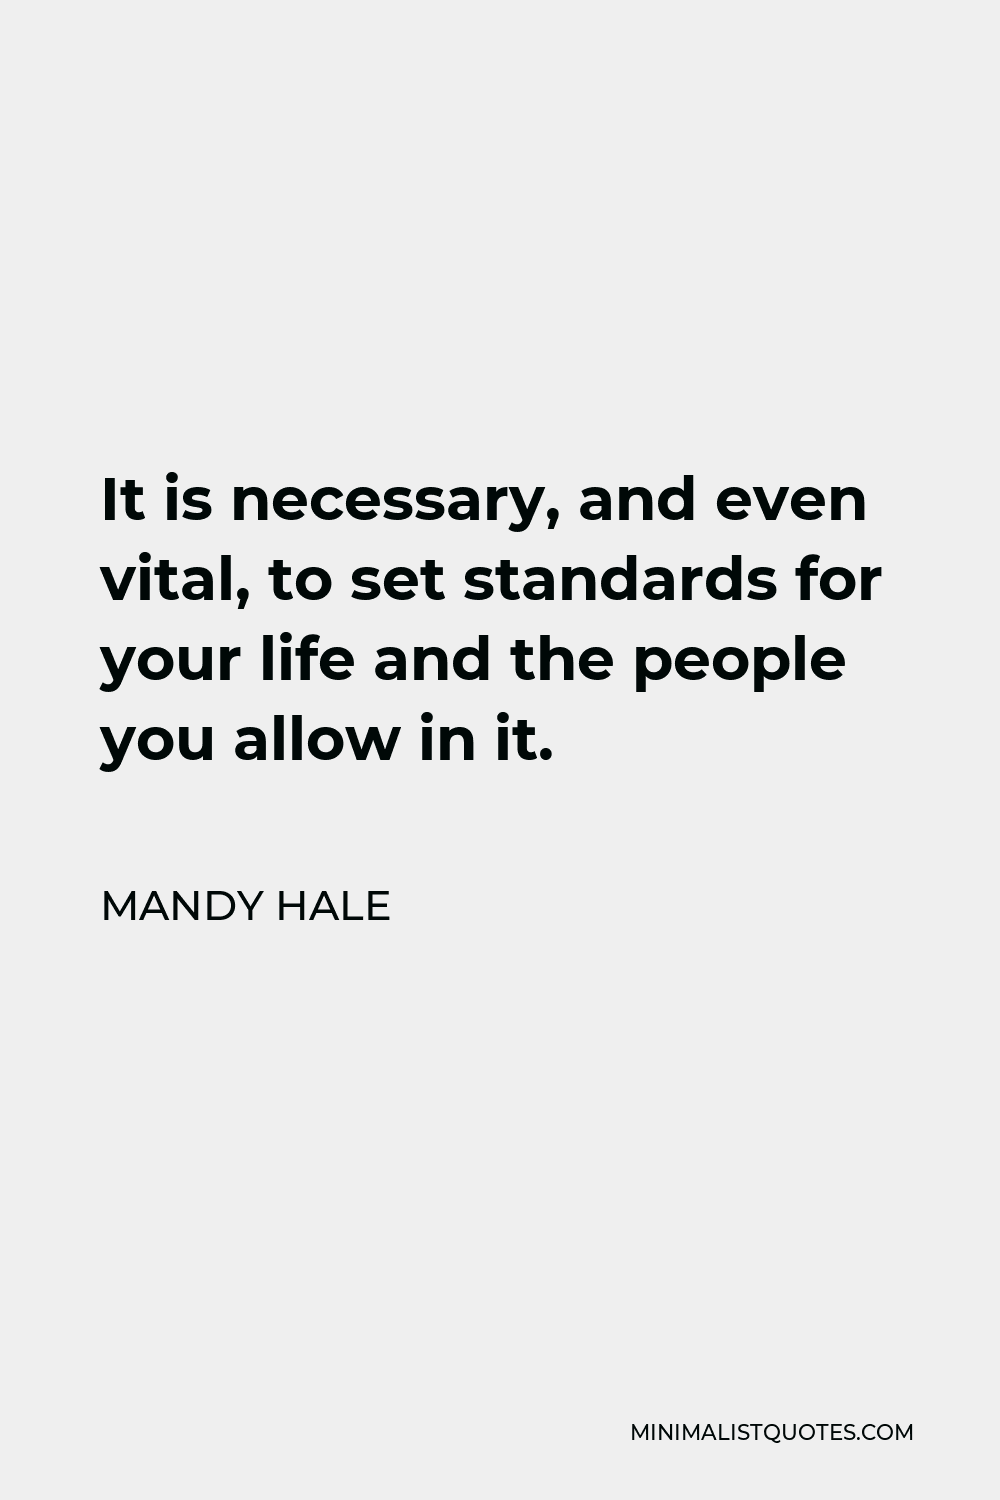 Mandy Hale Quote - It is necessary, and even vital, to set standards for your life and the people you allow in it.